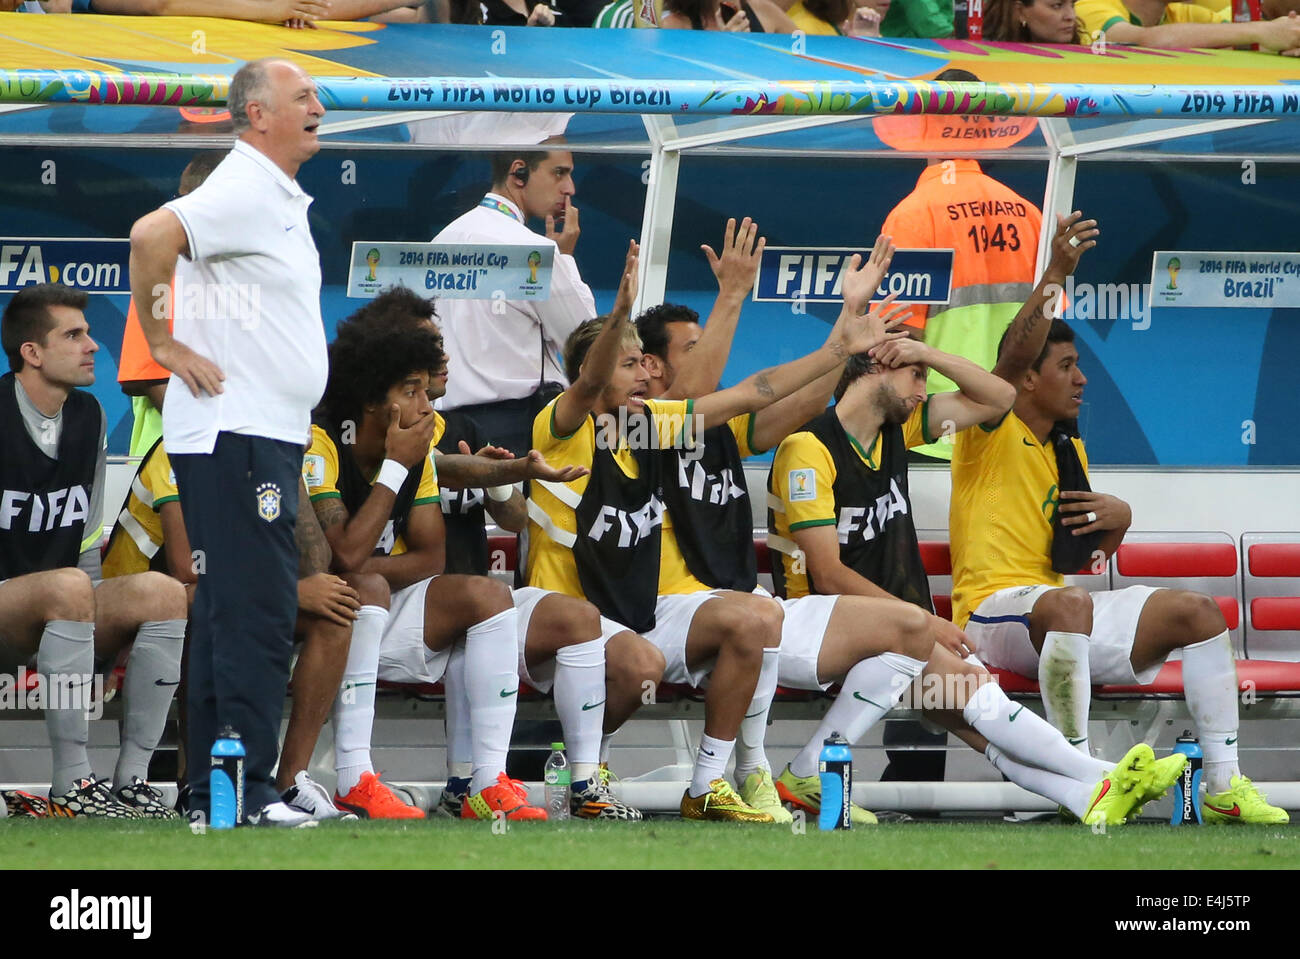 Brasilia, Brazil. 12th July, 2014. Brazil's Neymar (4th R) reacts while watching the third place play-off match between Brazil and Netherlands of 2014 FIFA World Cup at the Estadio Nacional Stadium in Brasilia, Brazil, on July 12, 2014. Netherlands won 3-0 over Brazil and took the third place of the tournament on Saturday. Credit:  Cao Can/Xinhua/Alamy Live News Stock Photo